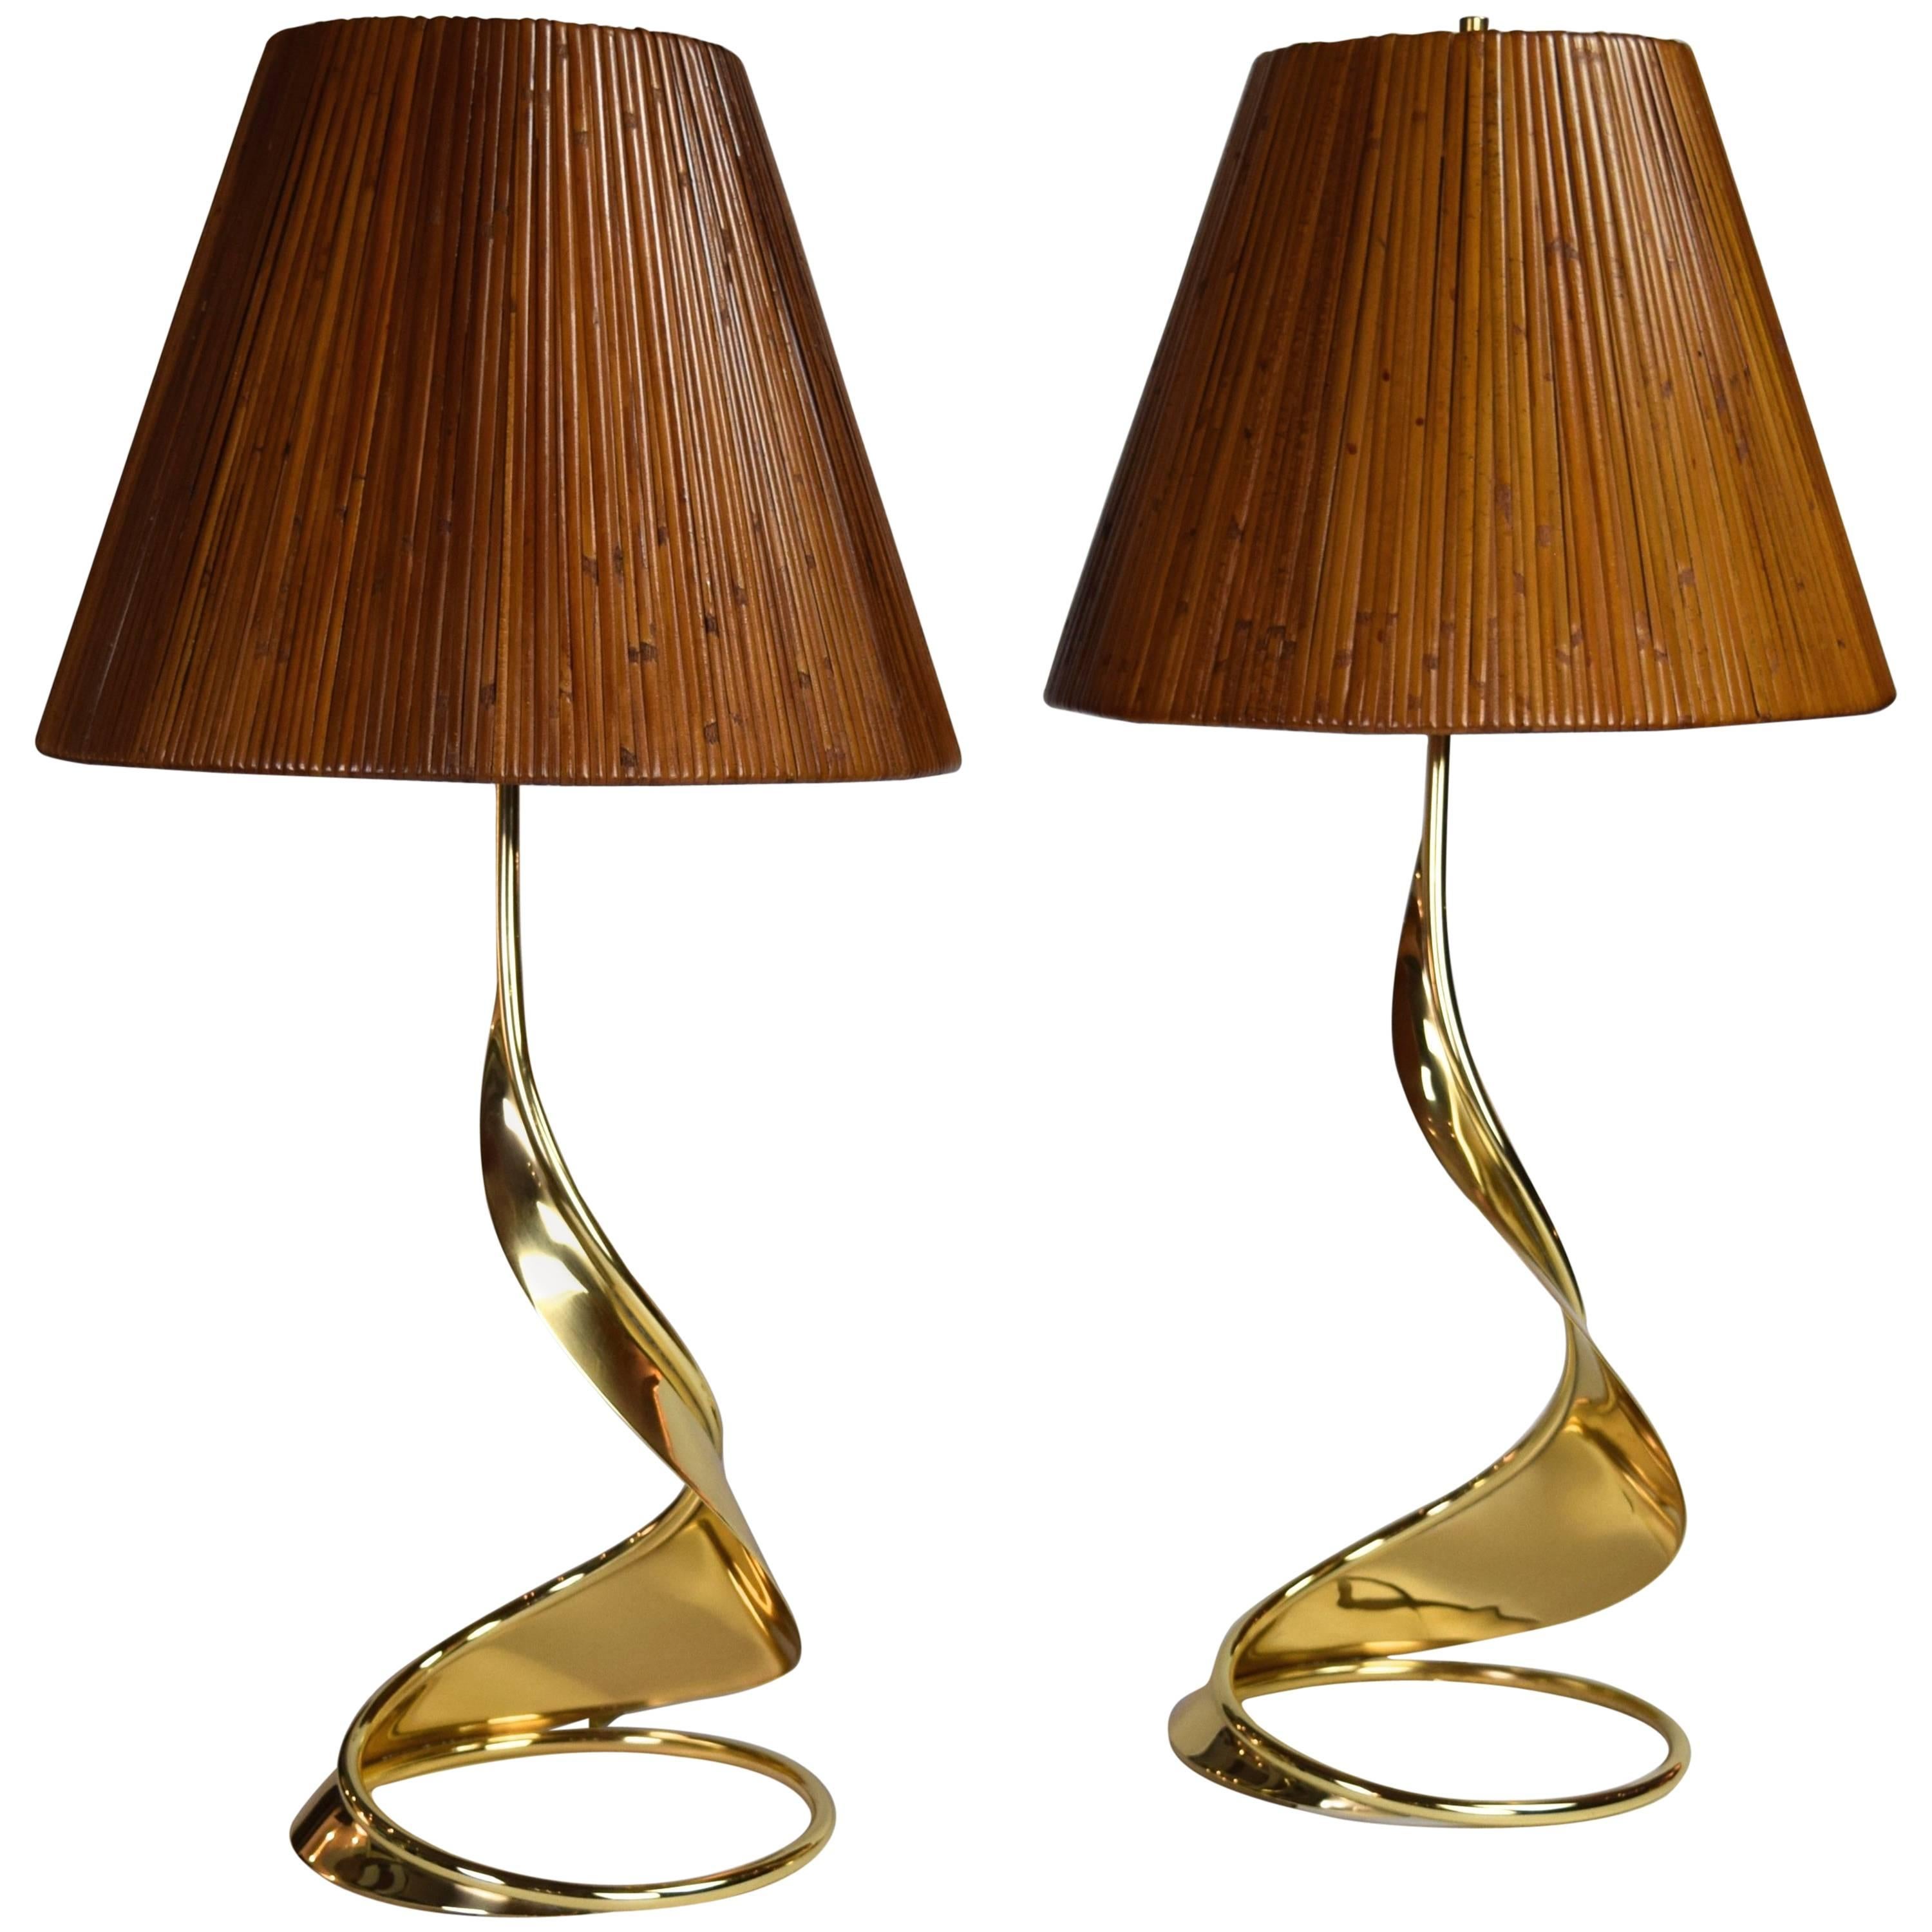 Pair of Brass Spiral Lamps with Bamboo Shades